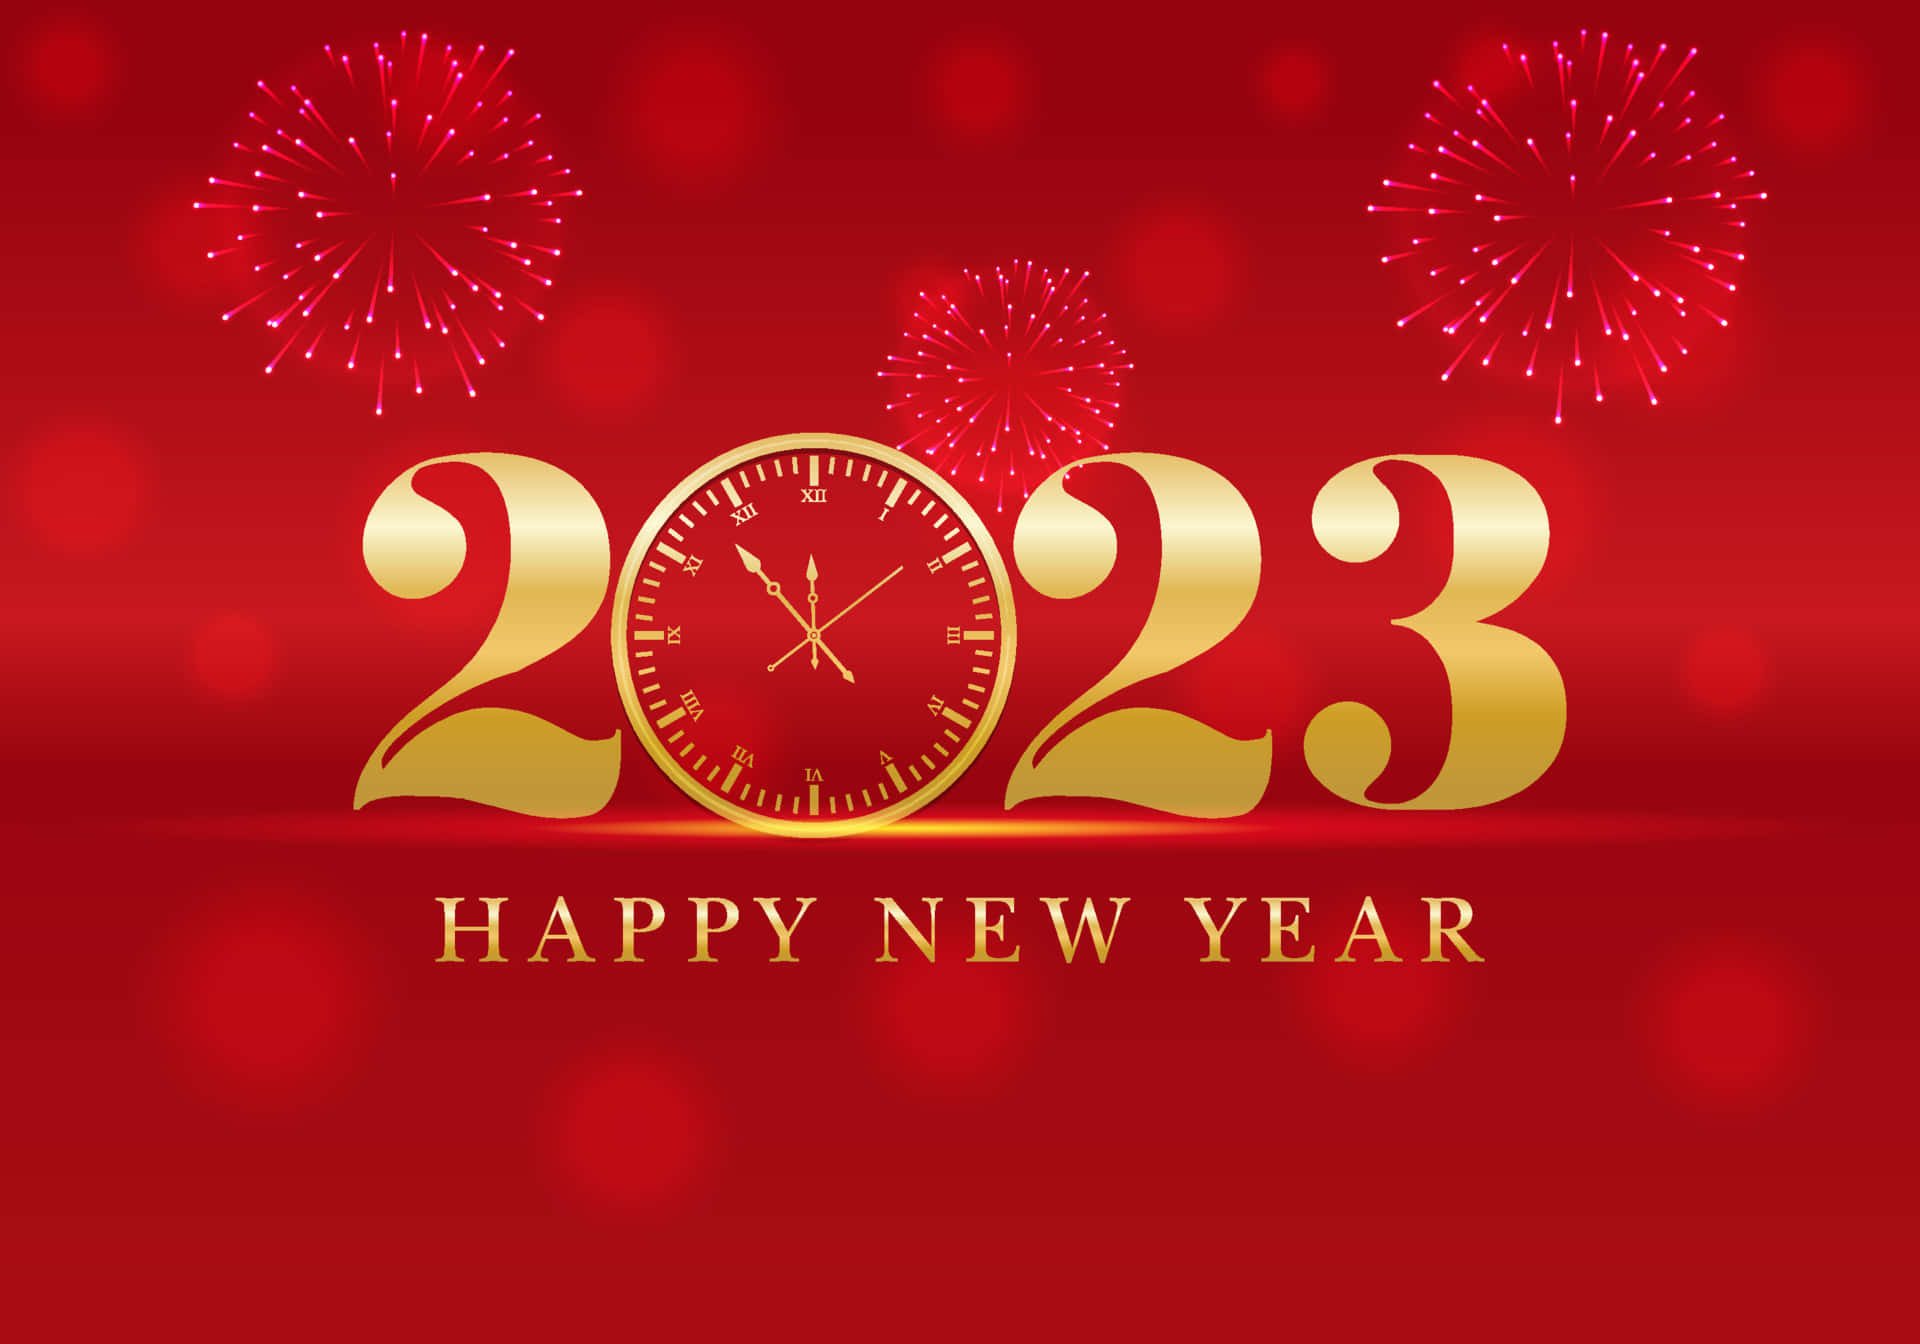 Happy New Year 2023 With Golden Clock And Fireworks